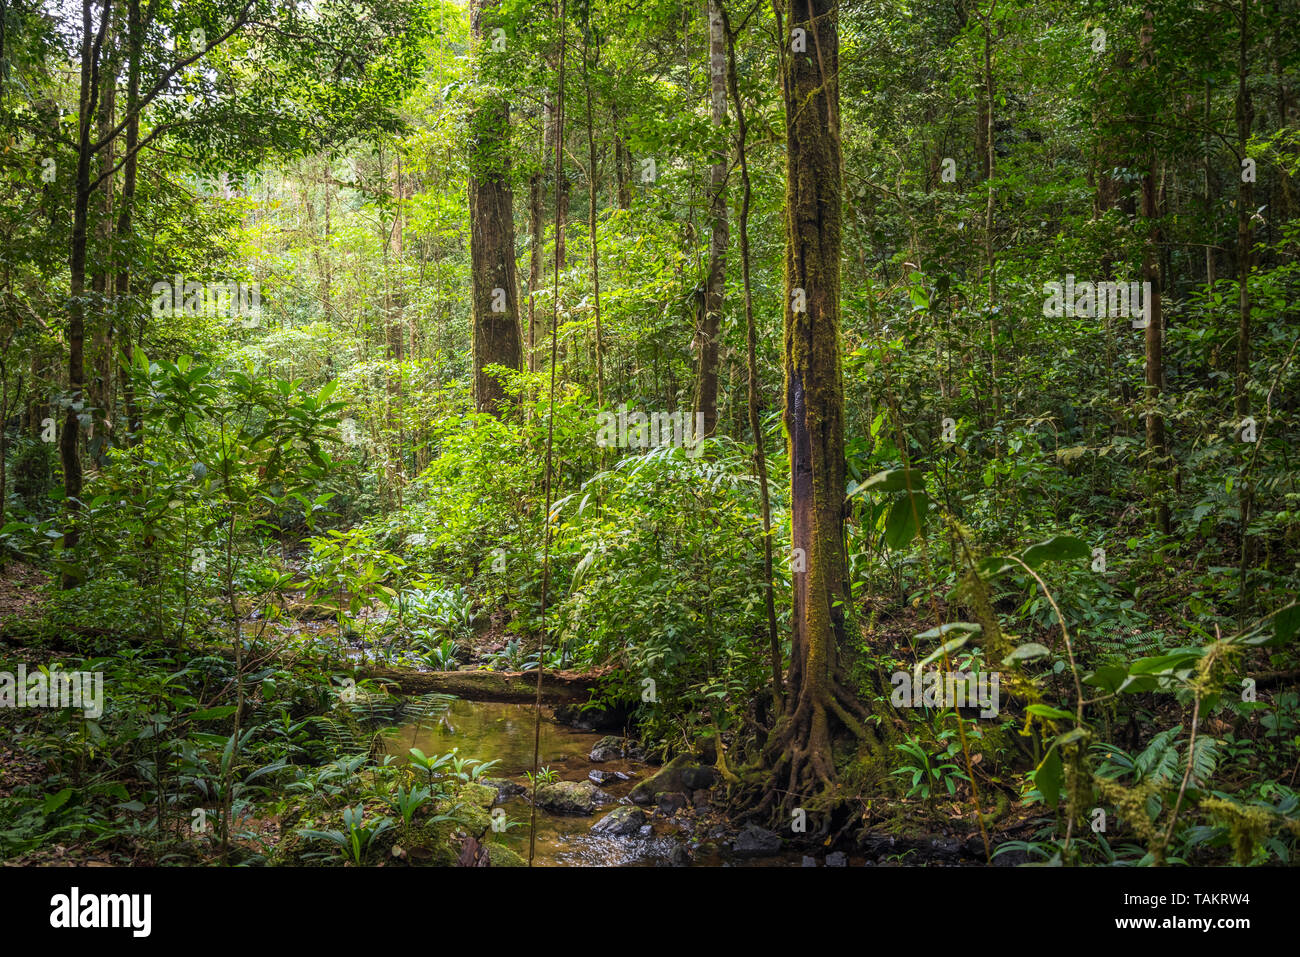 Cloud forest or rain forest scene from Panama Stock Photo